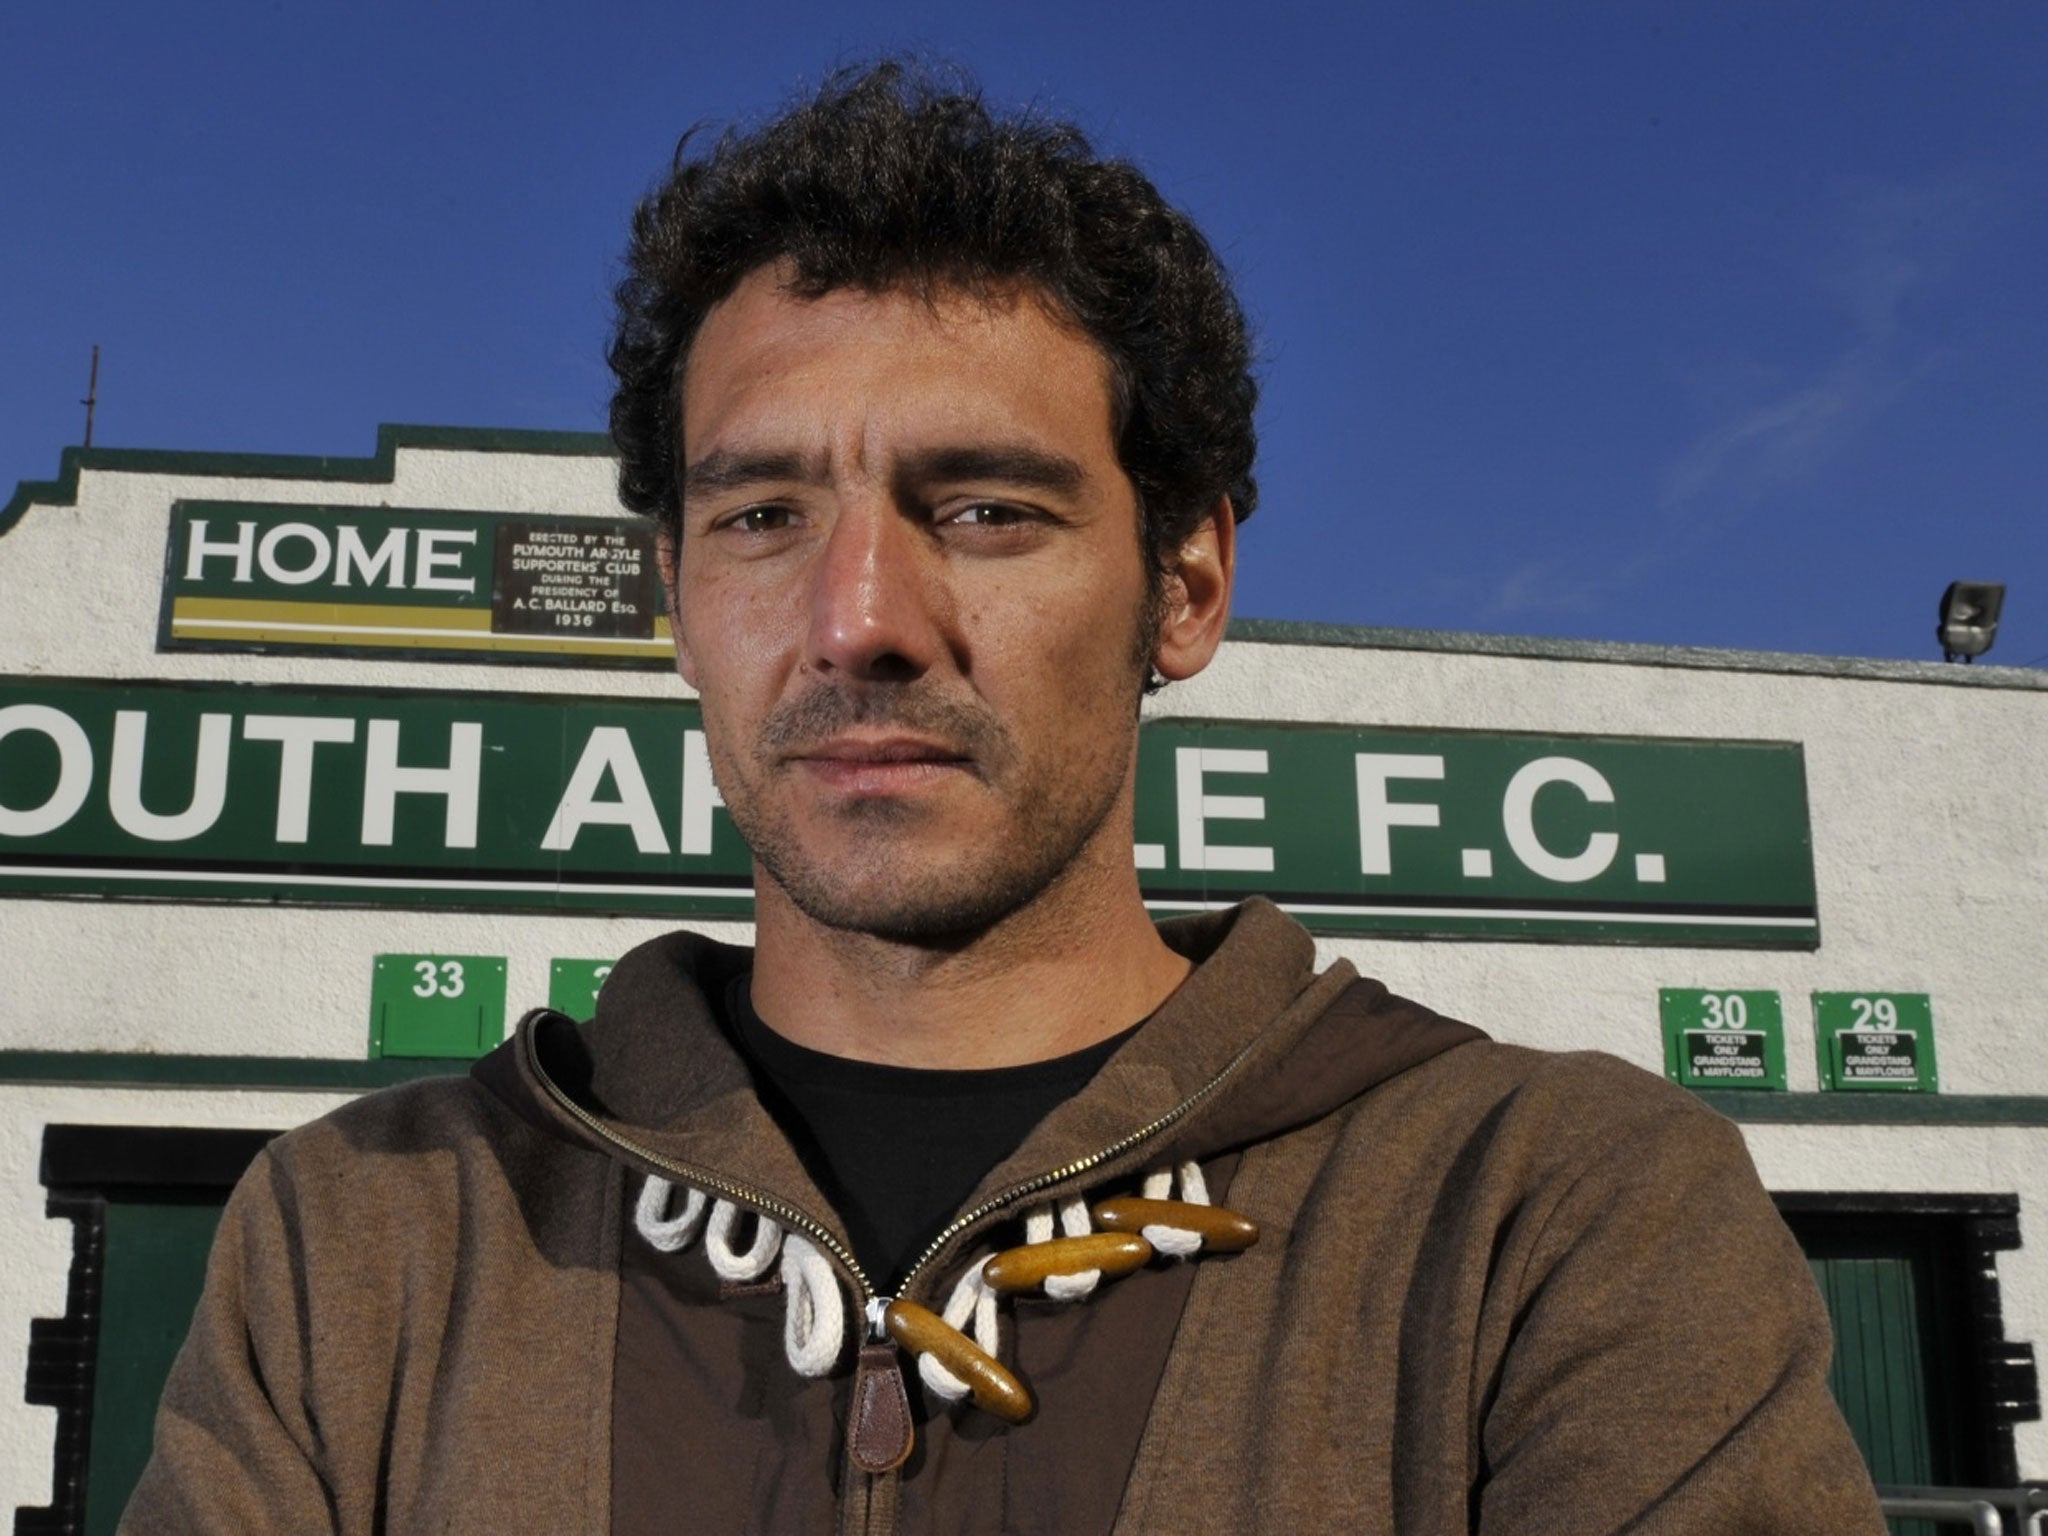 Adieu: After 13 years at Plymouth, working without pay and fighting cancer, Romain Larrieu has been sacked